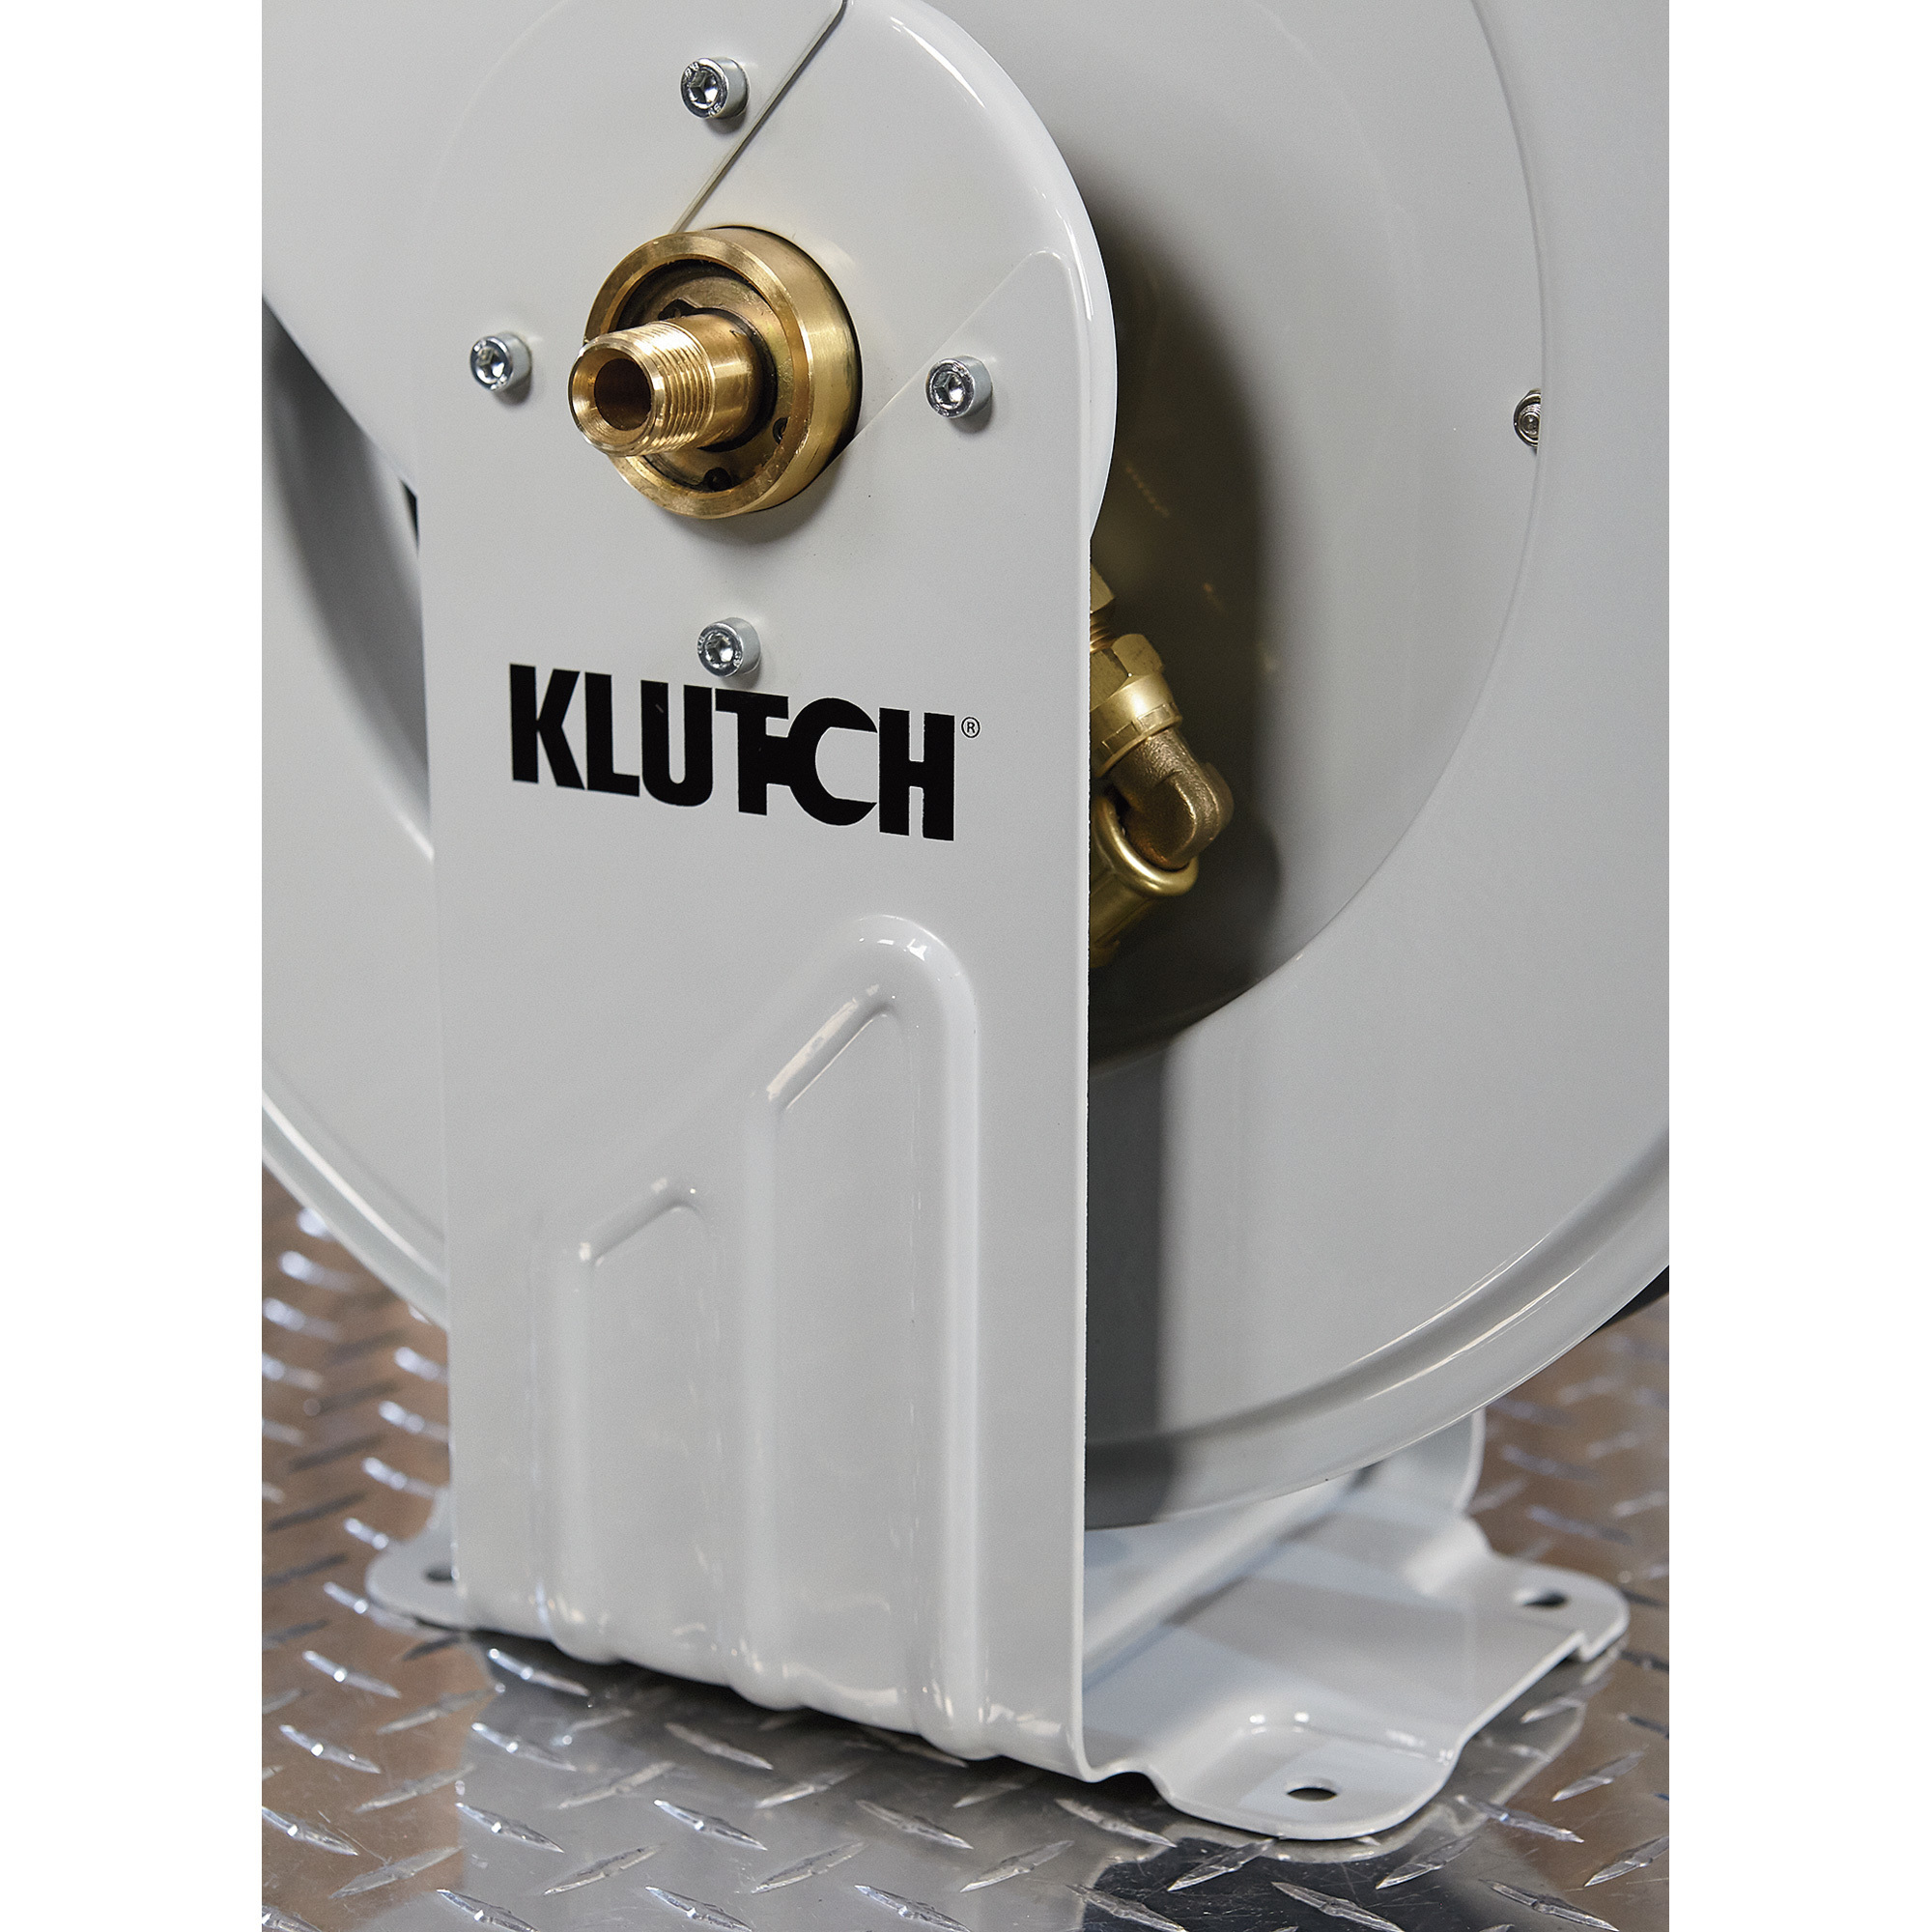 Klutch Auto Rewind Air Hose Reel, With 1/2in. x 50ft. NRB Rubber